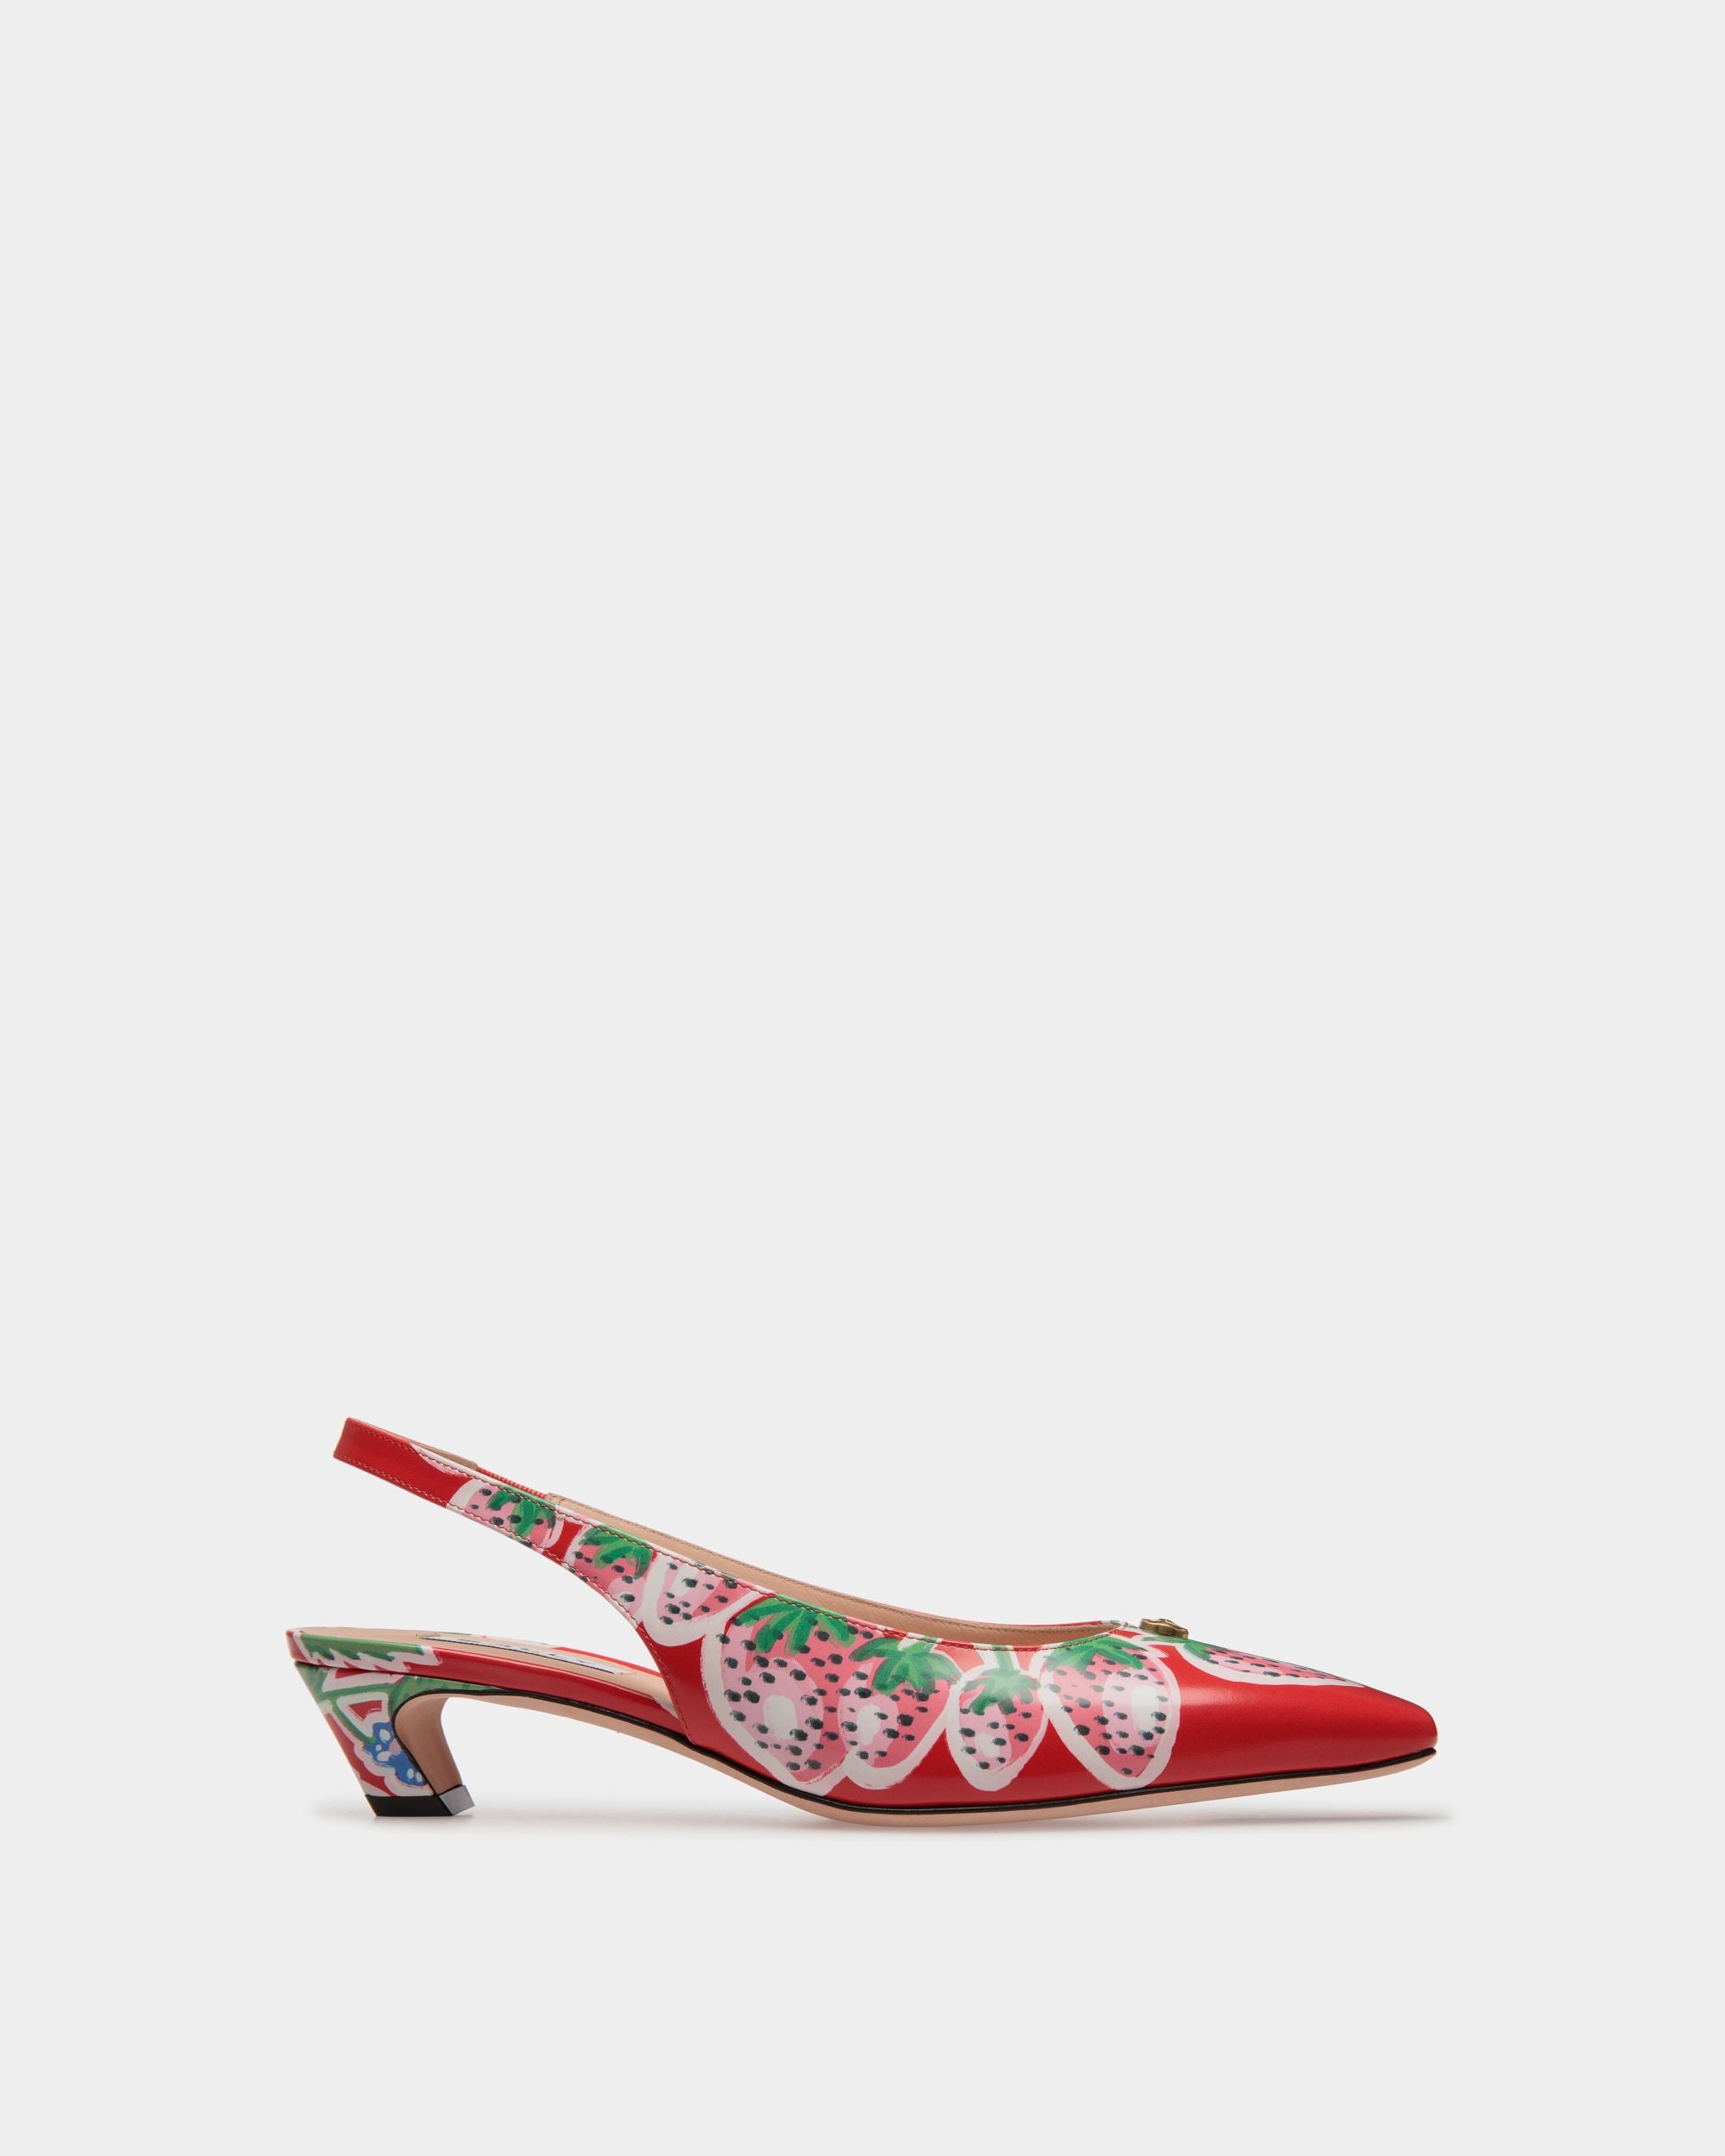 Women's Sylt Slingback Pump in Strawberry Print Brushed Leather | Bally | Still Life Side